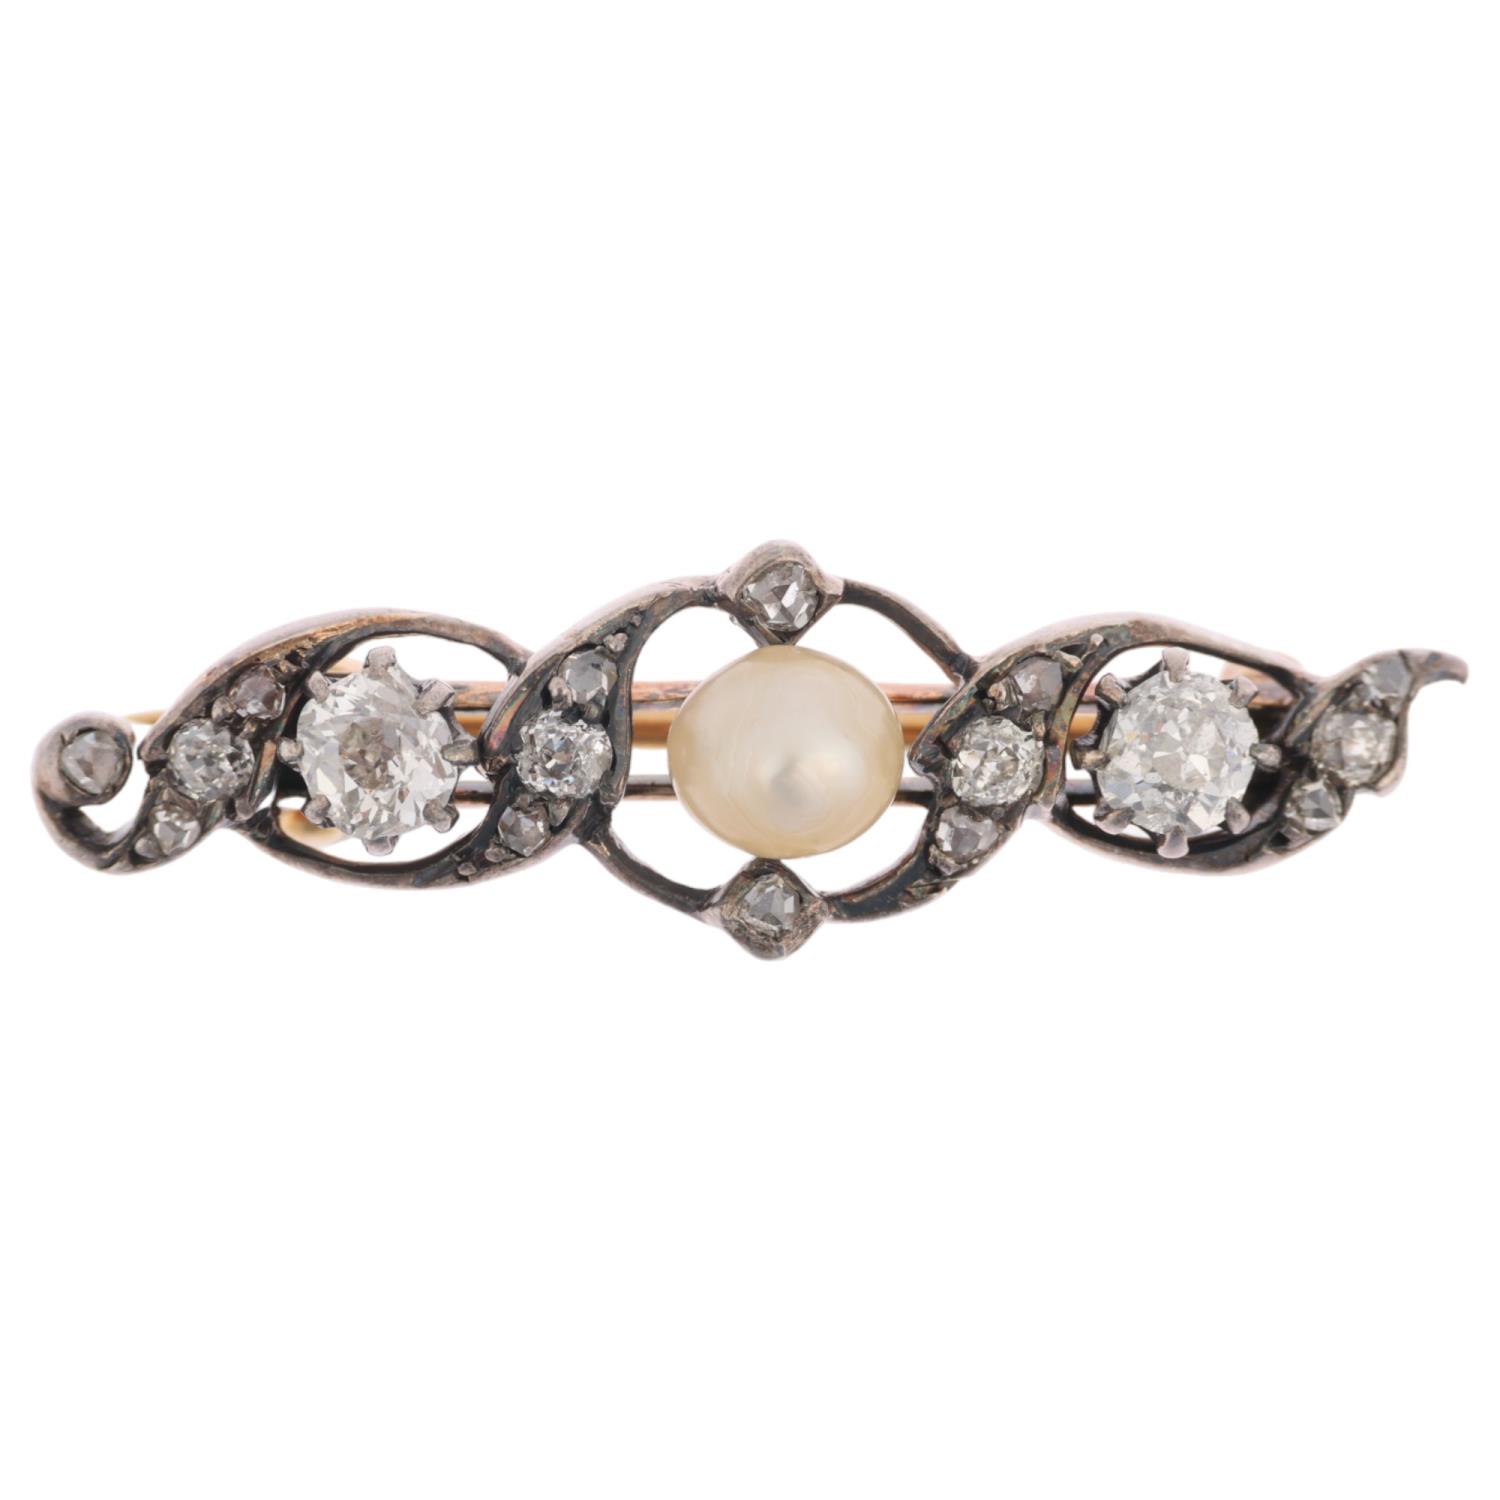 An Art Nouveau pearl and diamond openwork bar brooch, circa 1900, centrally set with 6mm pearl